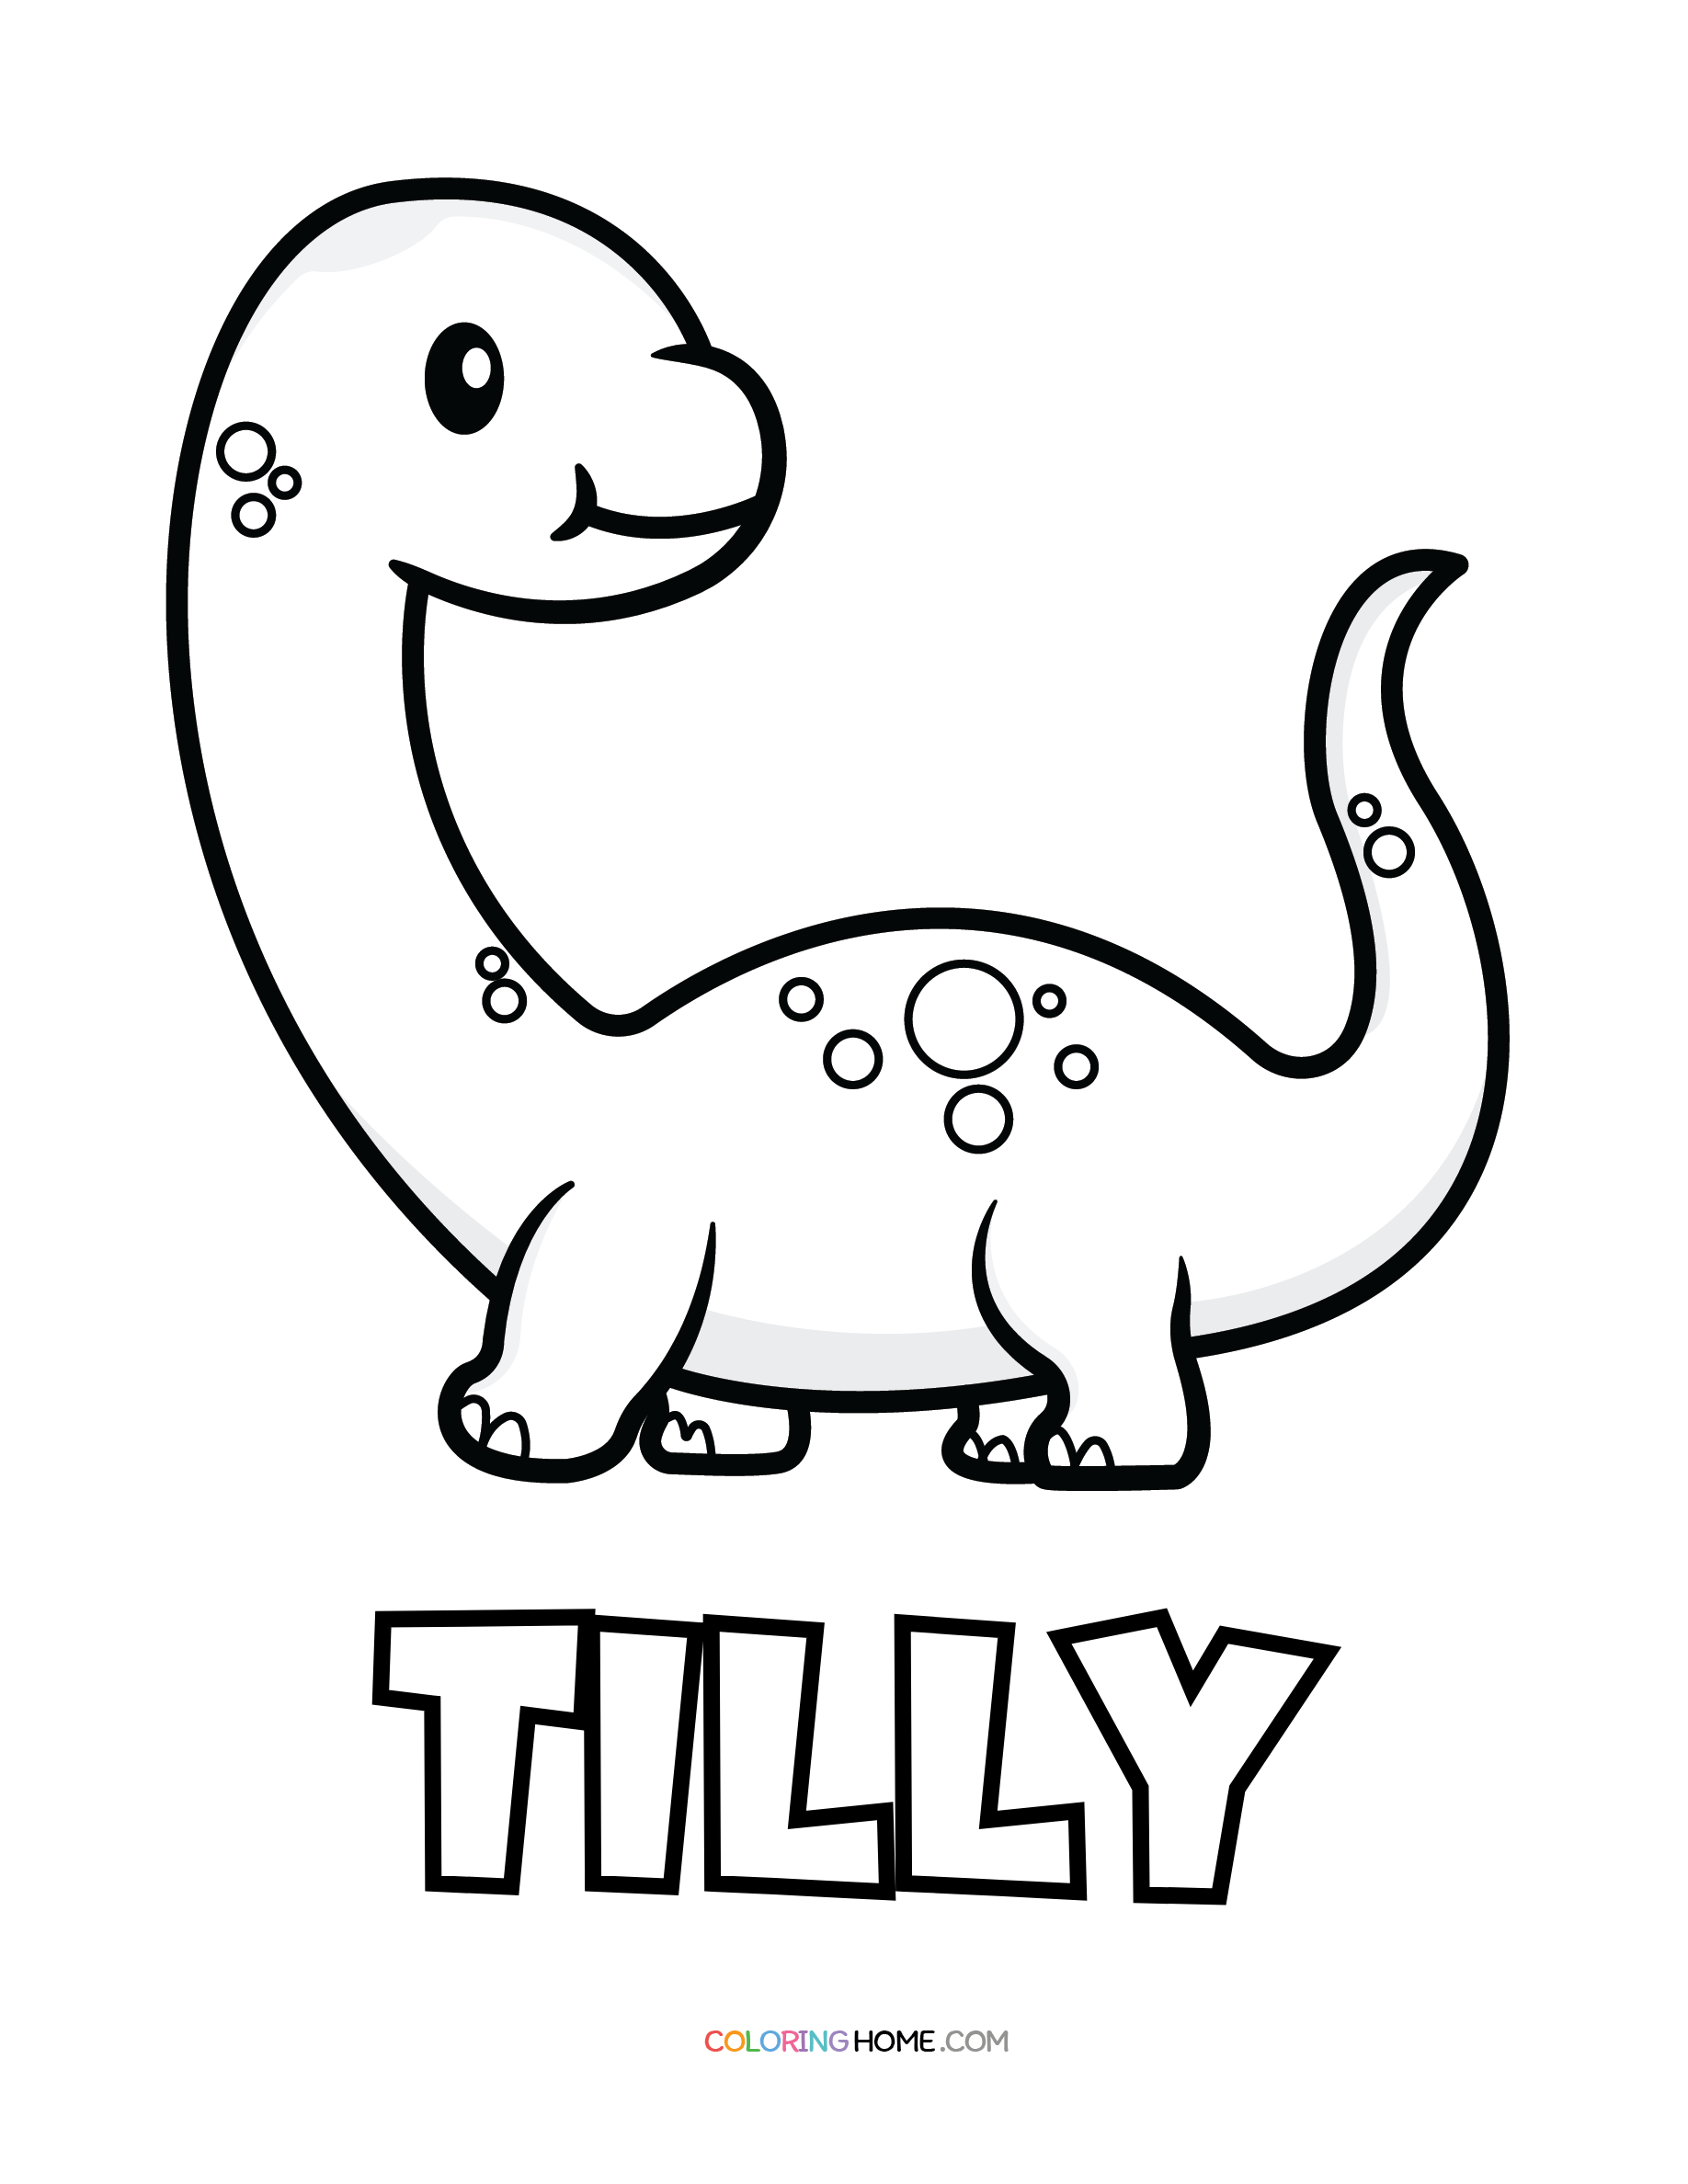 Tilly dinosaur coloring page